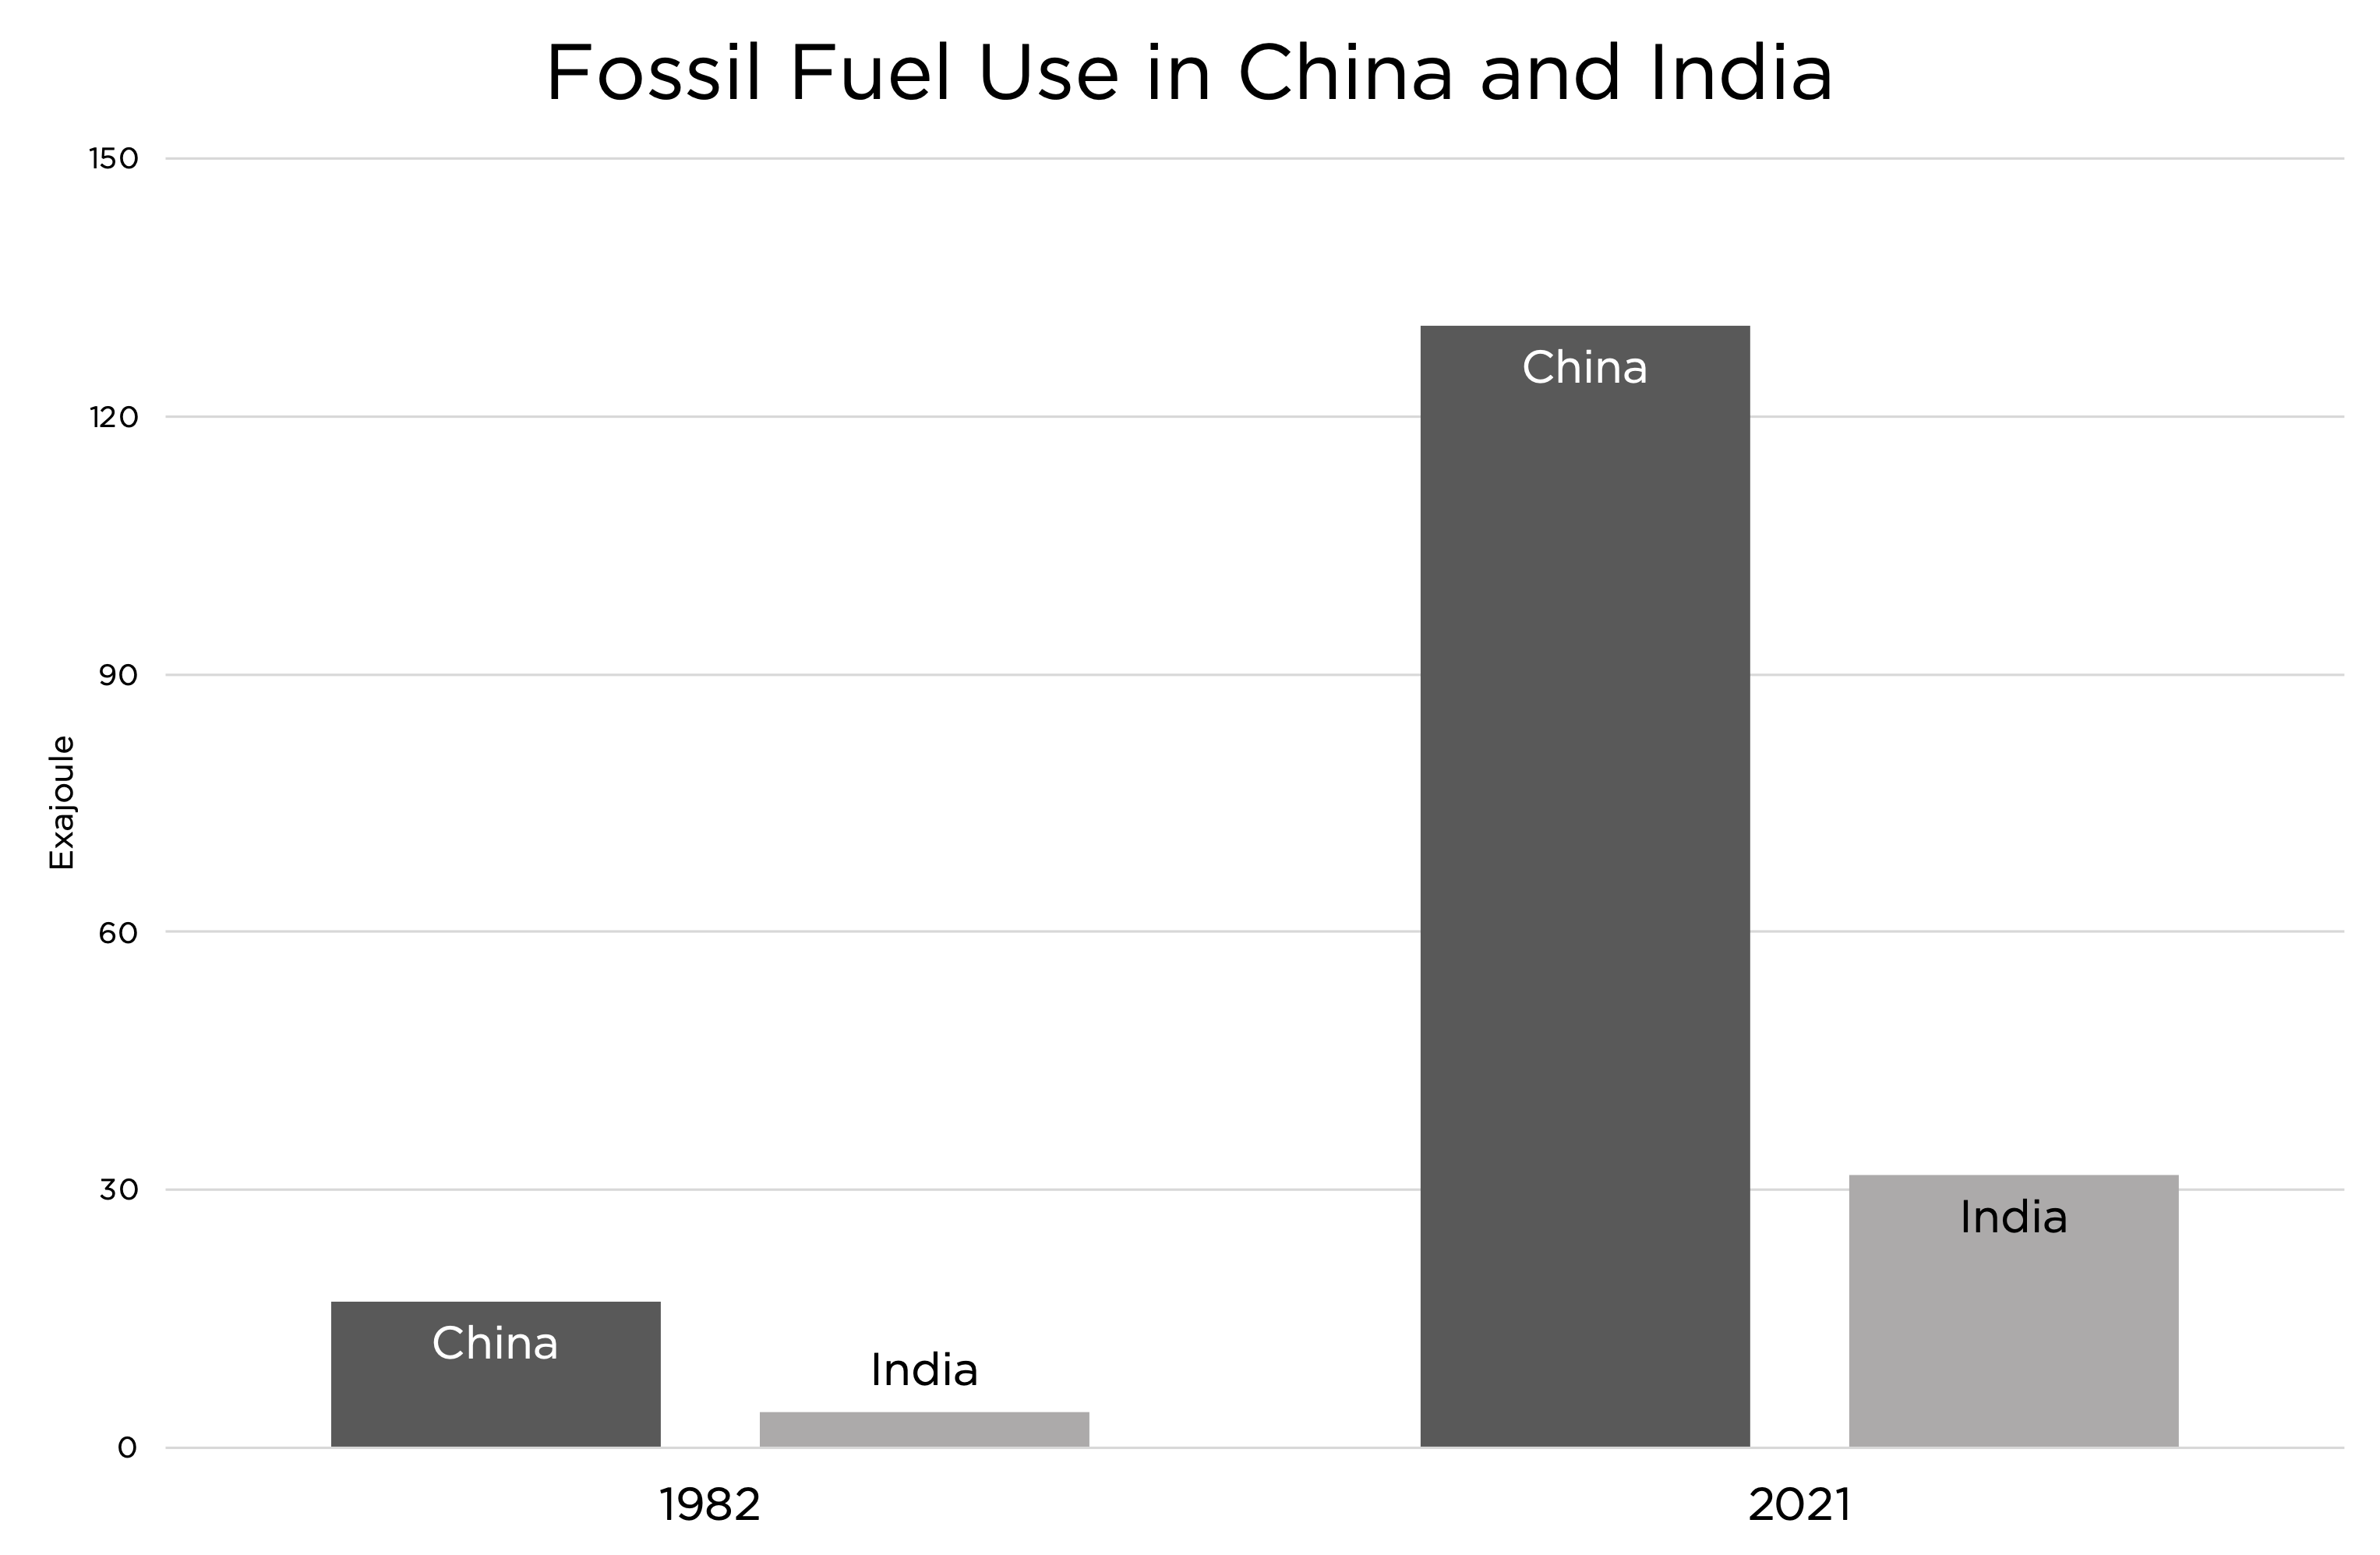 Fossil fuel use in China and India